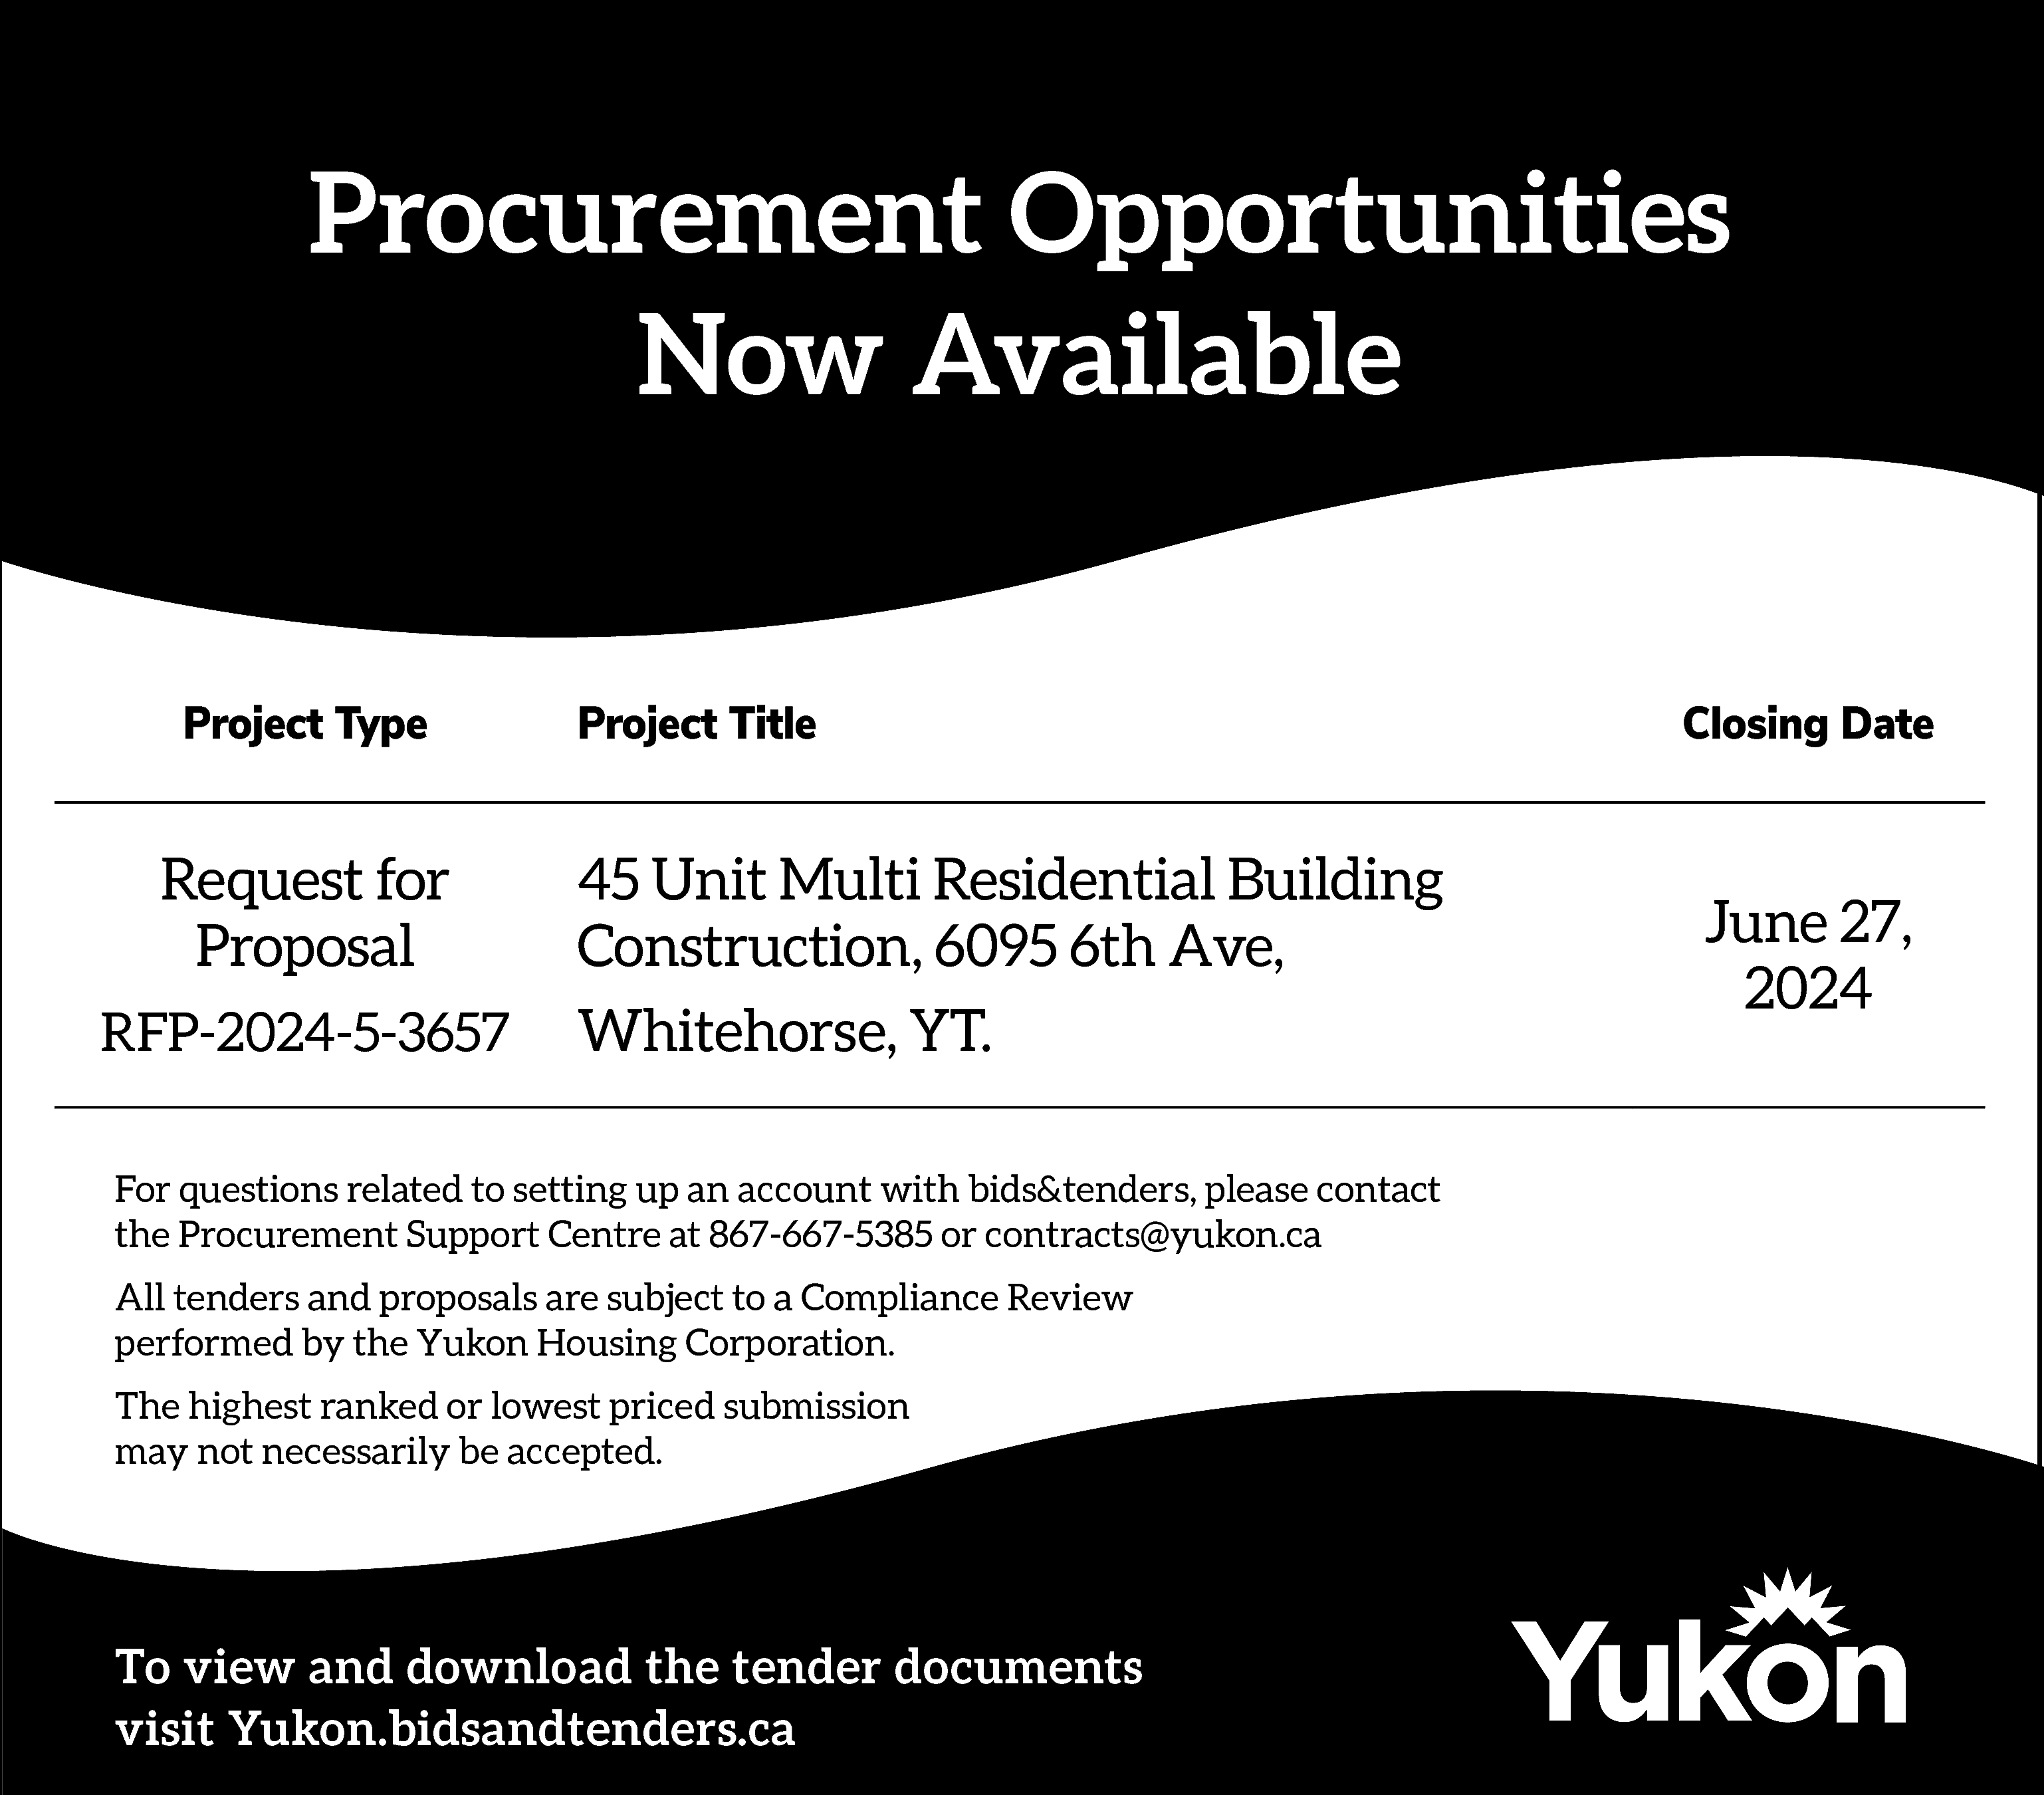 Procurement Opportunities <br>Now Available <br>Project  Procurement Opportunities  Now Available  Project Type    Request for  Proposal  RFP-2024-5-3657    Project Title    45 Unit Multi Residential Building  Construction, 6095 6th Ave,  Whitehorse, YT.    For questions related to setting up an account with bids&tenders, please contact  the Procurement Support Centre at 867-667-5385 or contracts@yukon.ca  All tenders and proposals are subject to a Compliance Review  performed by the Yukon Housing Corporation.  The highest ranked or lowest priced submission  may not necessarily be accepted.    To view and download the tender documents  visit Yukon.bidsandtenders.ca    Closing Date    June 27,  2024    